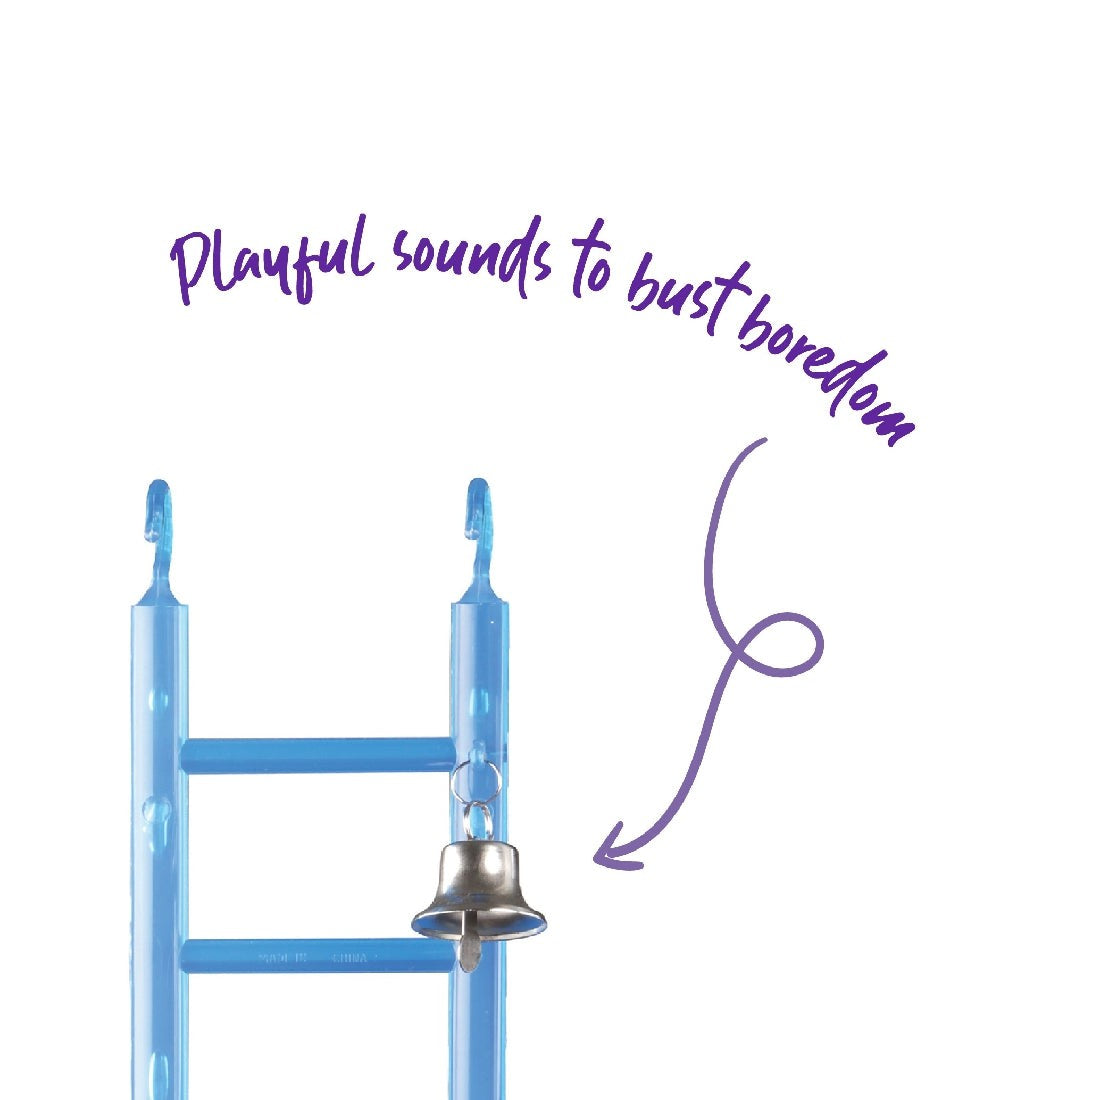 Blue bird toy ladder with a bell, phrase about sounds and boredom.